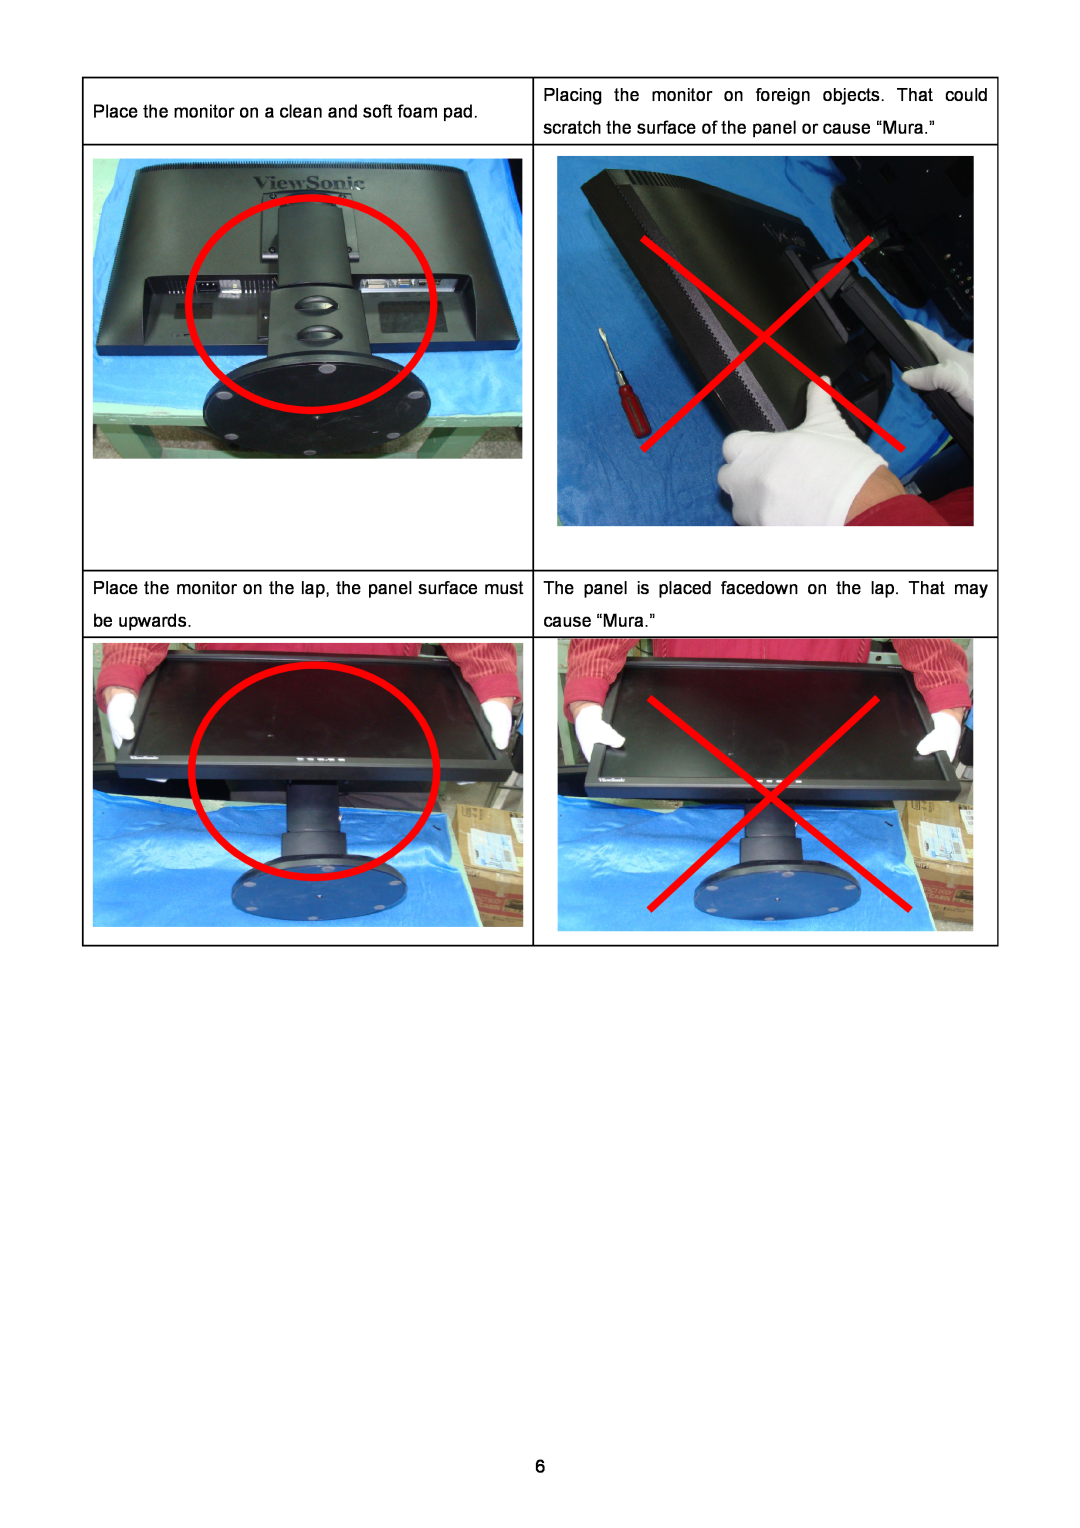 ViewSonic VSXXXXX service manual Place the monitor on a clean and soft foam pad 